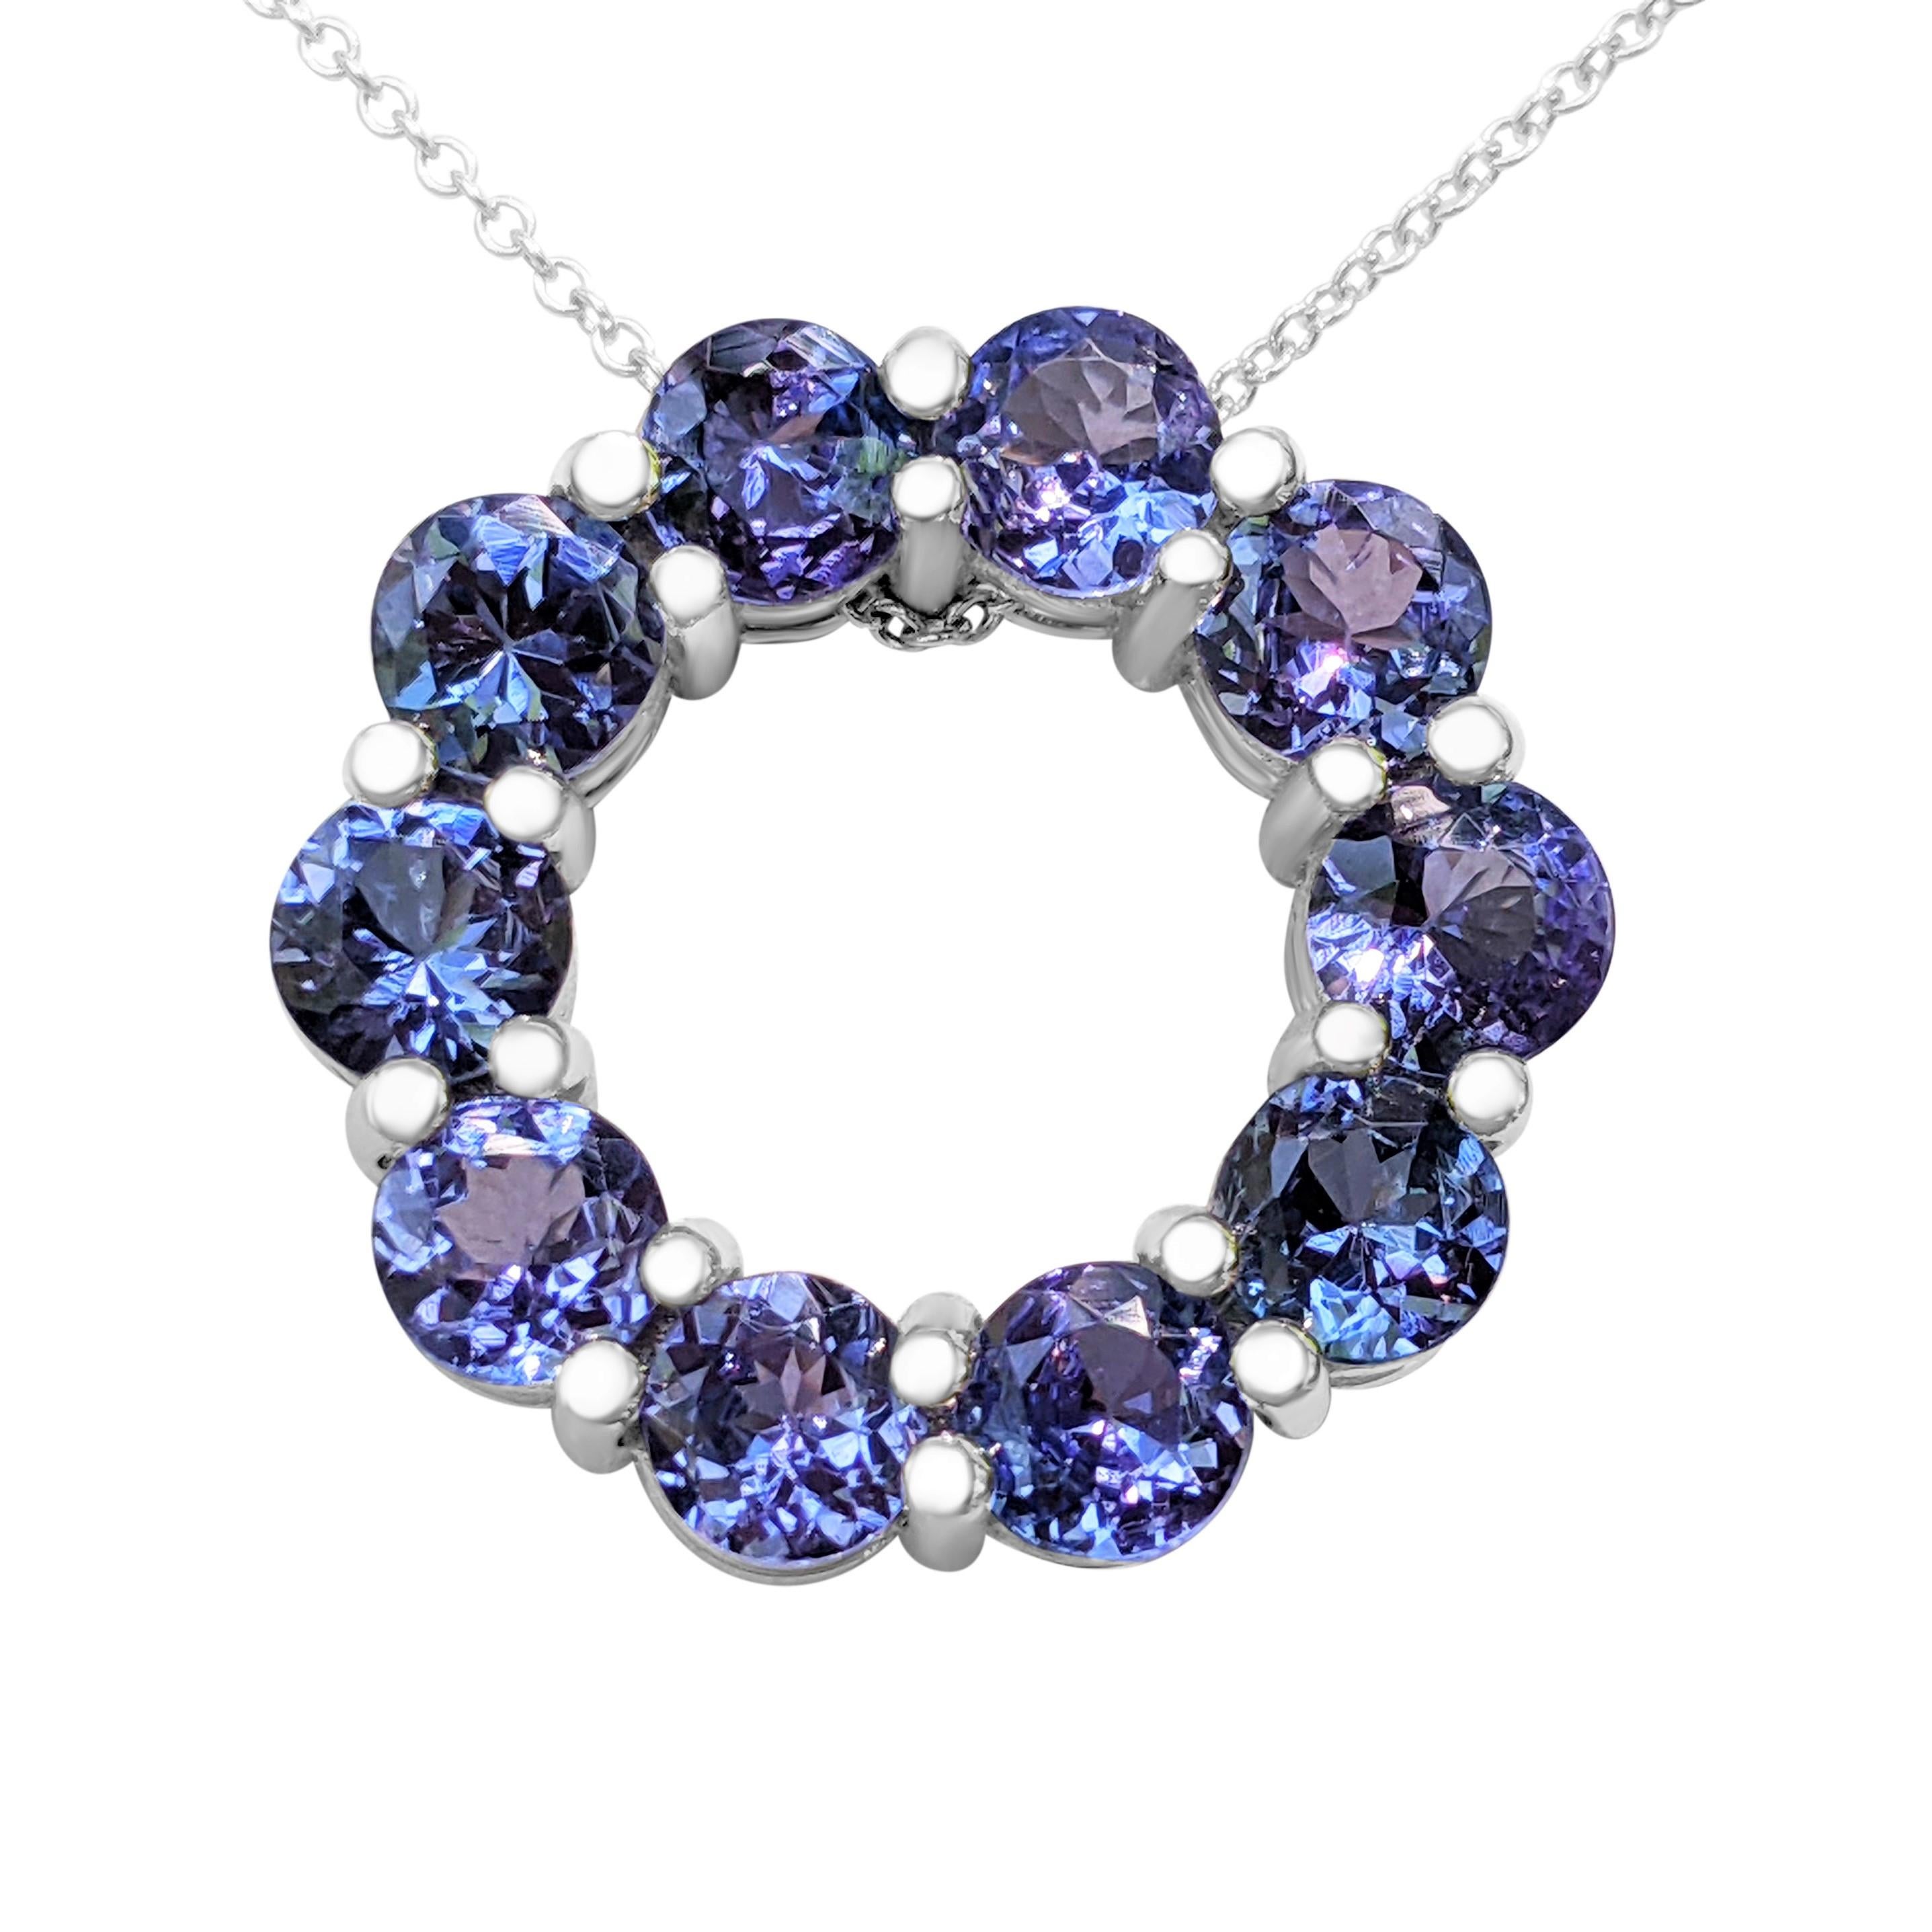 4.52 Carat Tanzanite, 14 Kt. White Gold, Necklace with Pendant 1